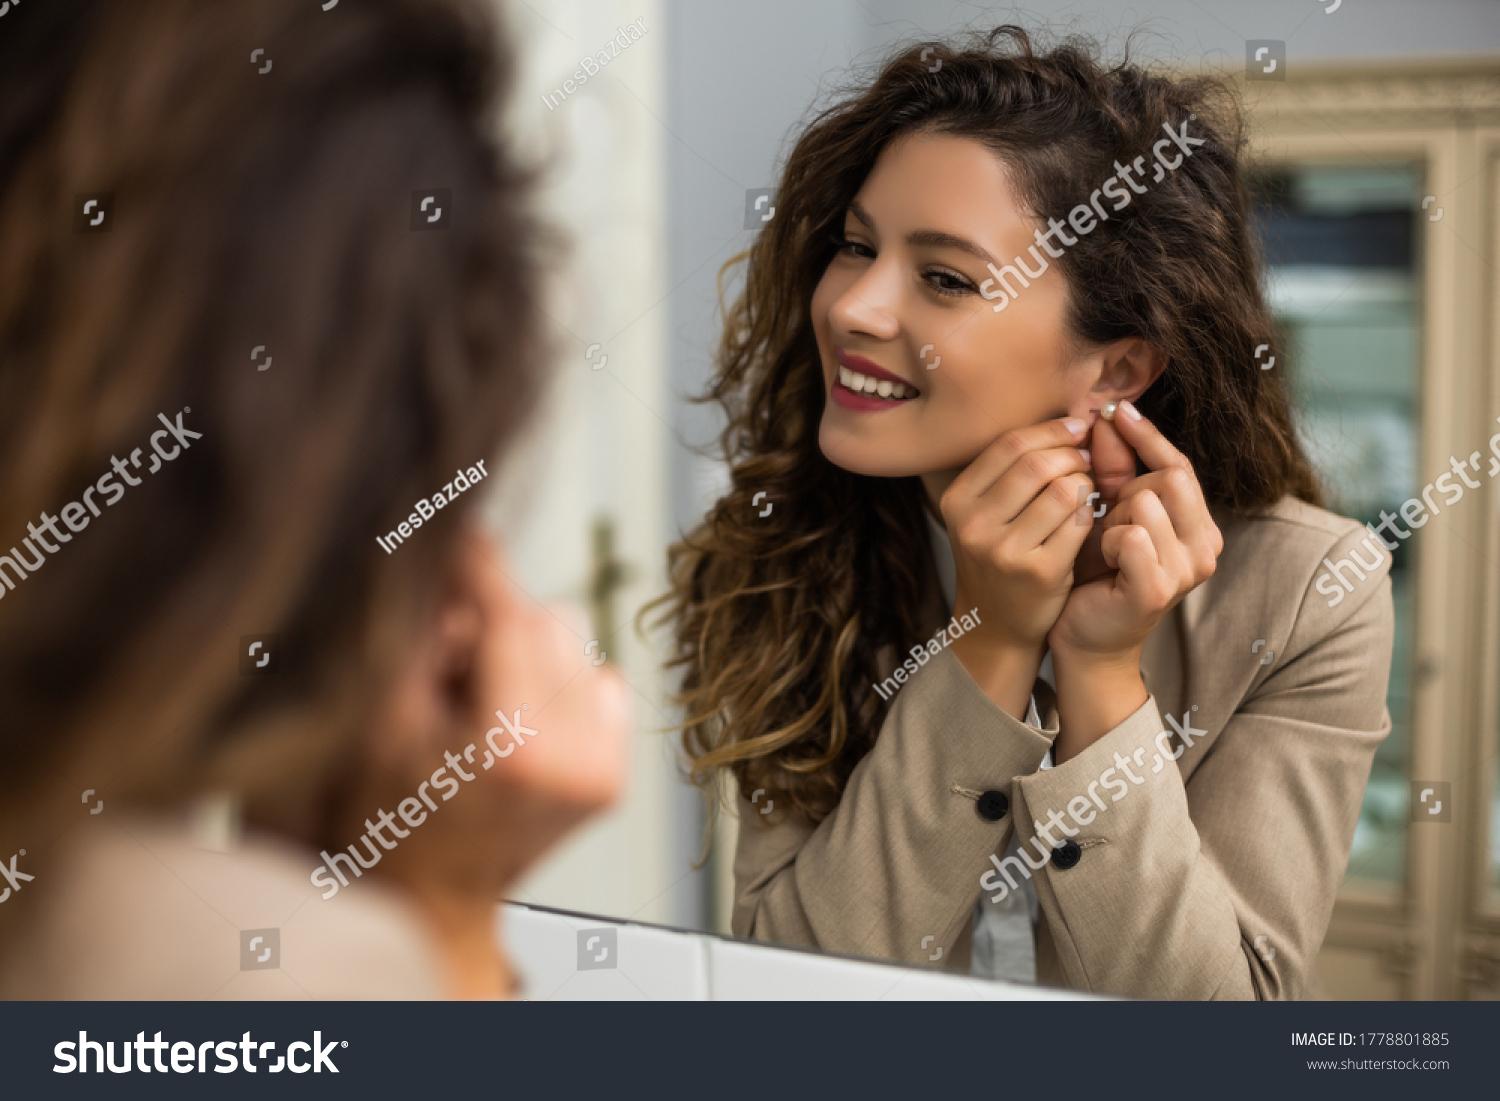 Businesswoman is  putting earrings while preparing for work. #1778801885